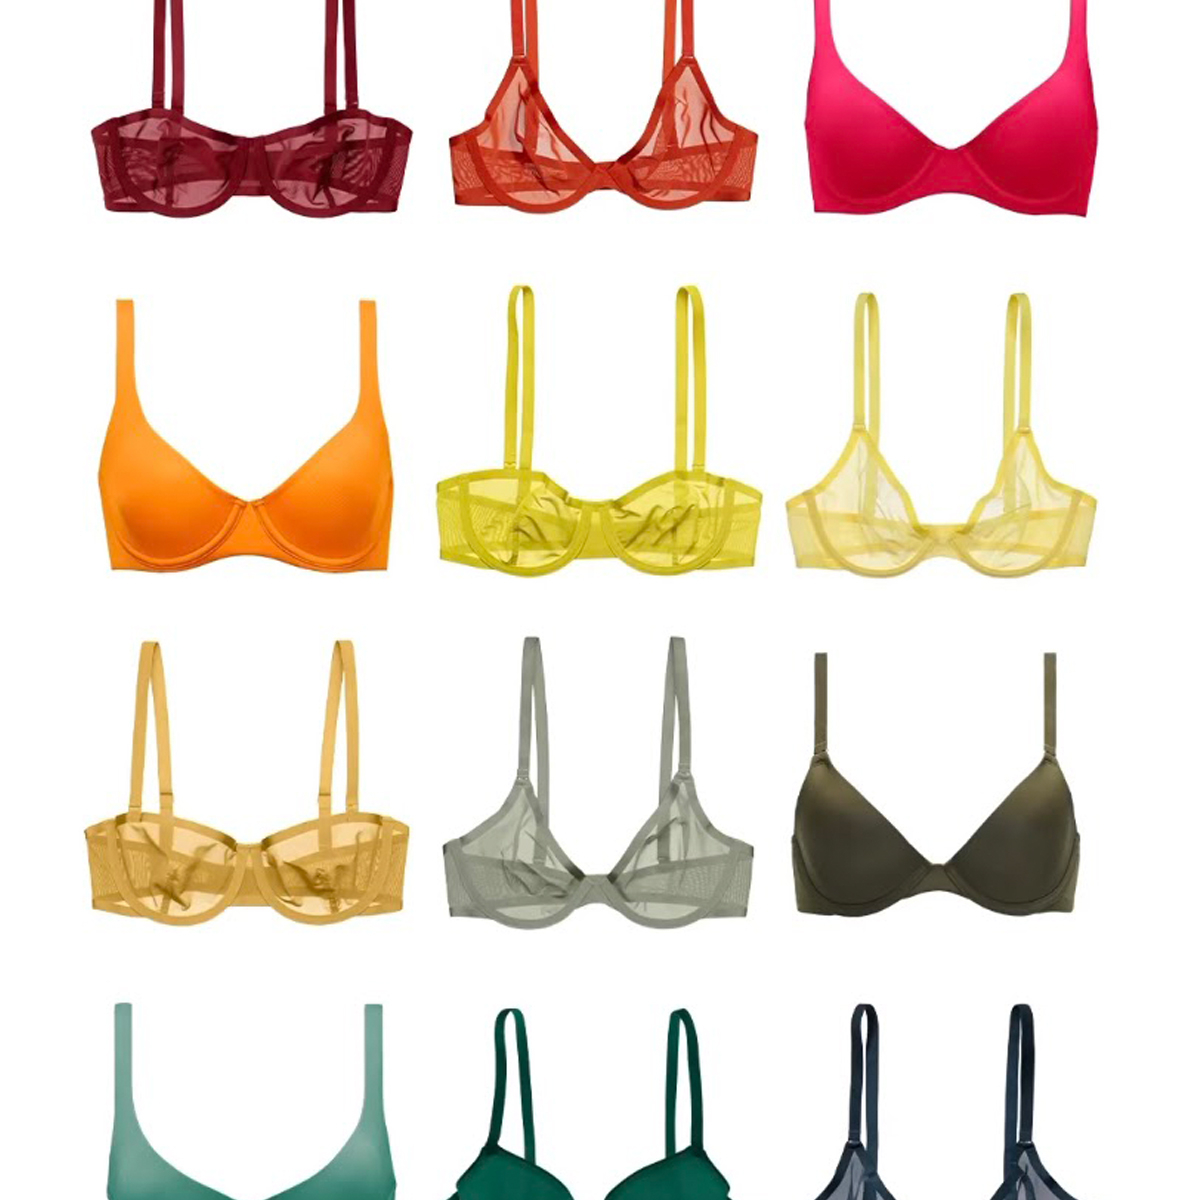 CUUP bras offer the comfort and support I've been looking for